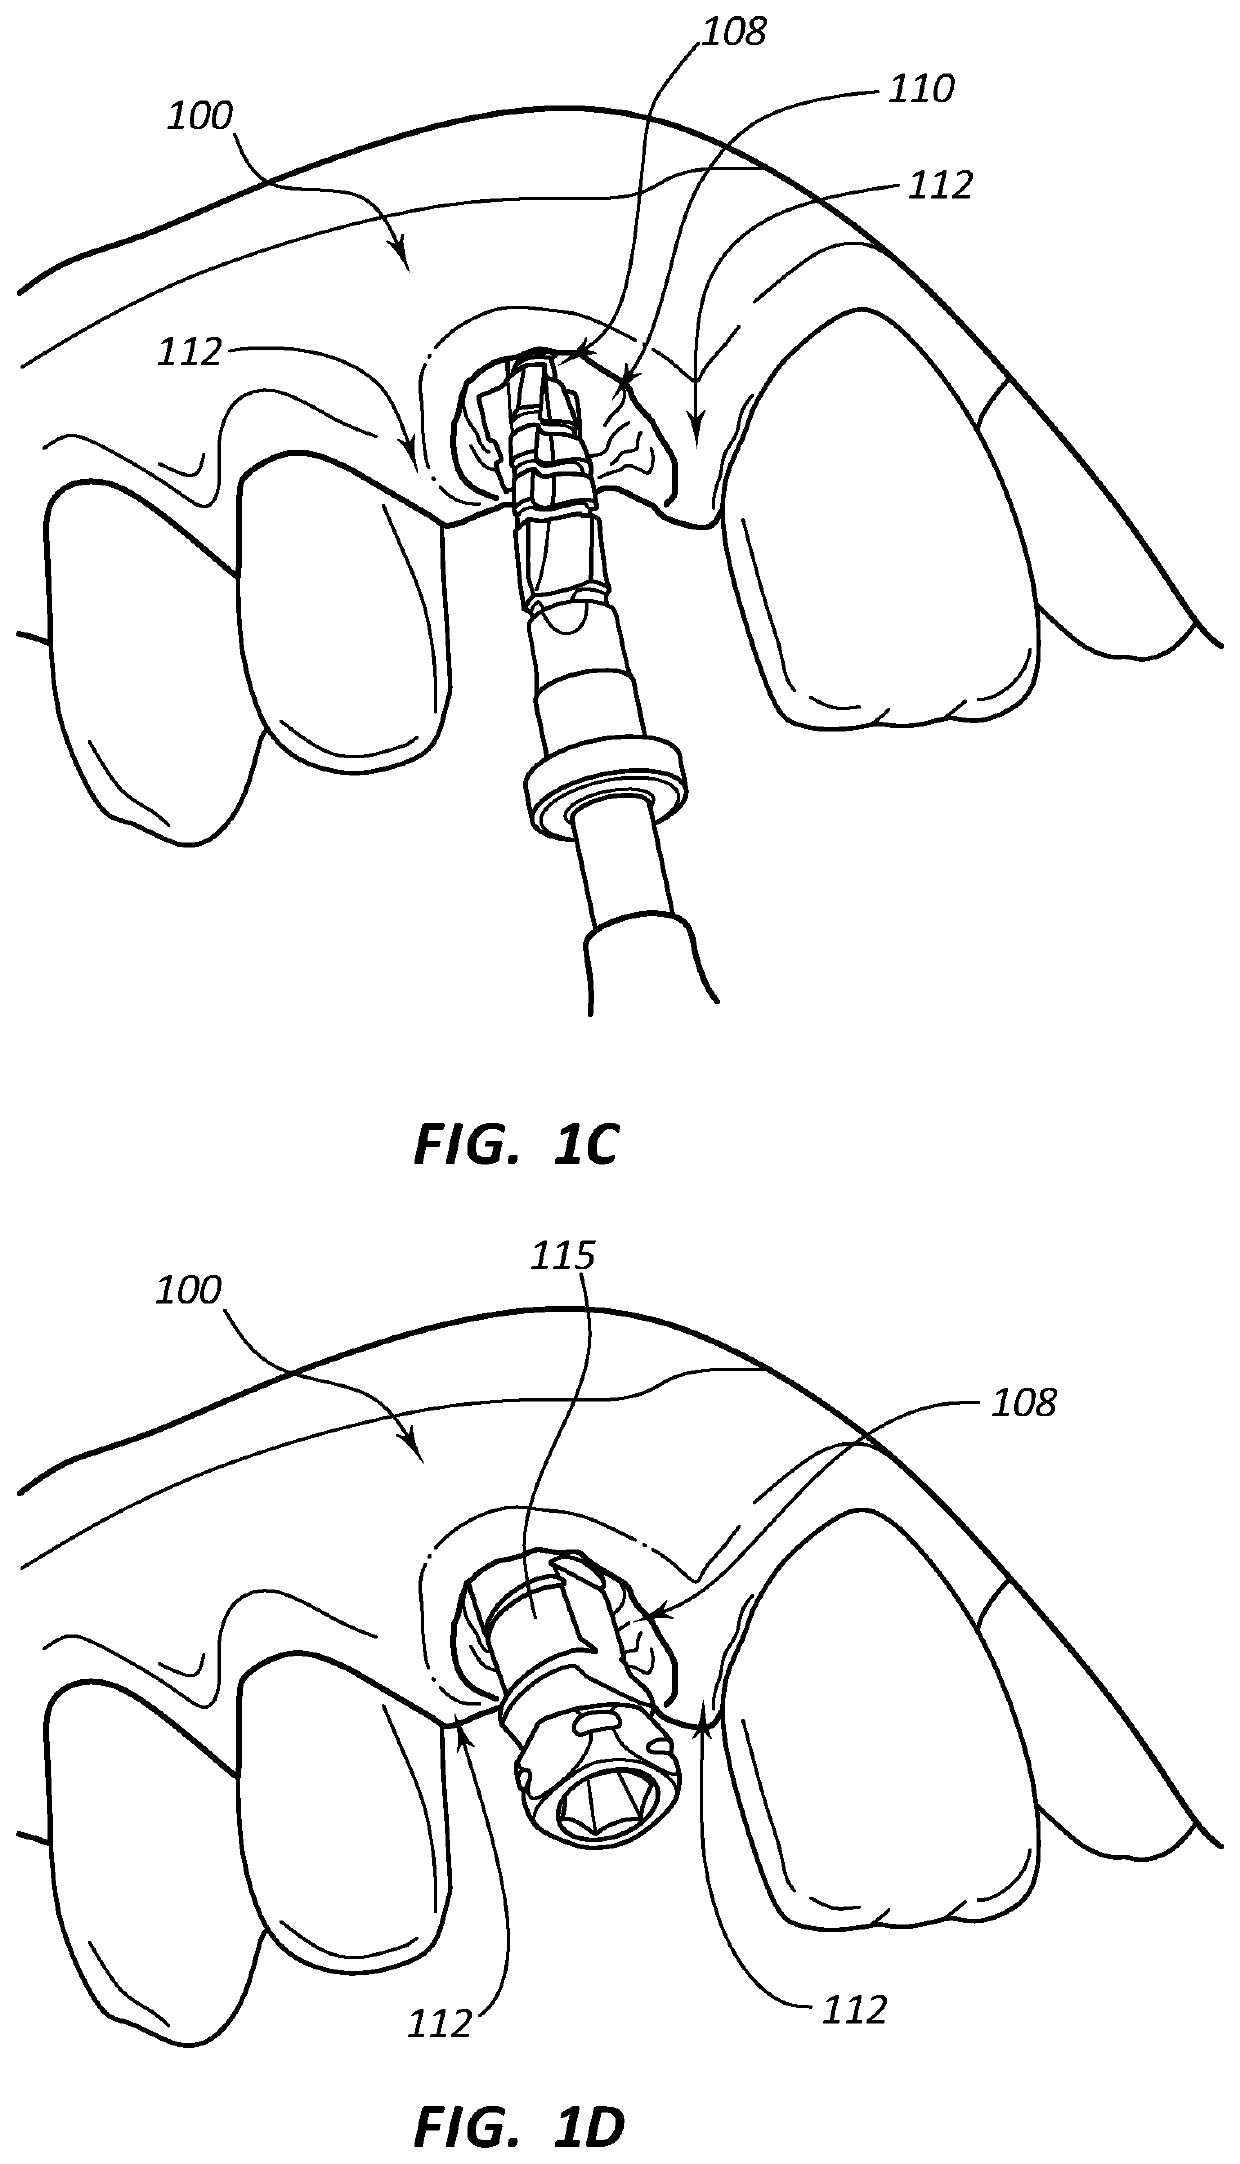 Dental implants with markers for determining three-dimensional positioning